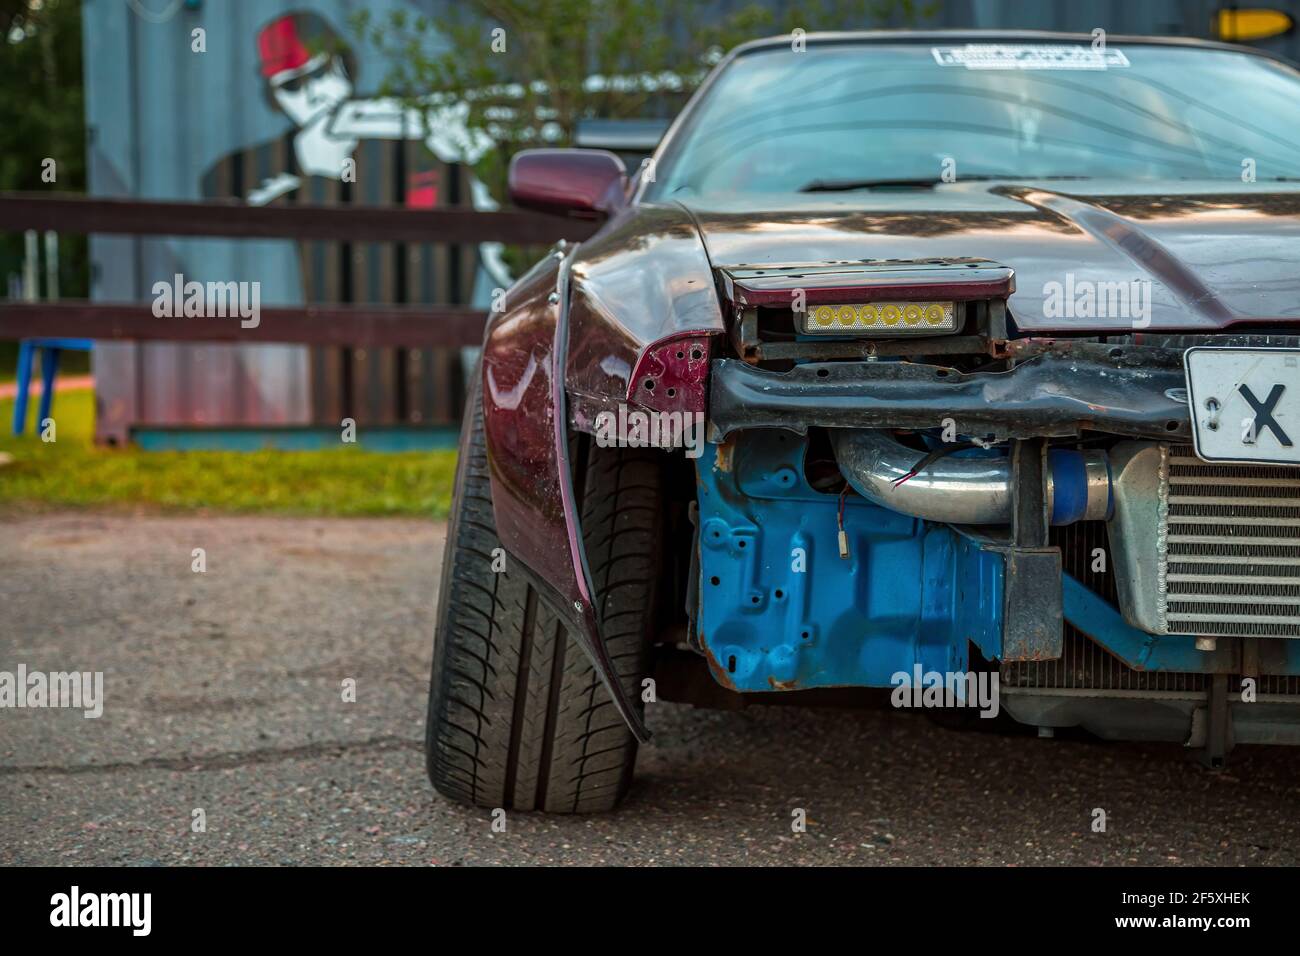 Moscow, Russia - July 06, 2019: Tuned Nissan 240SX. Special maded professional drift car. Parked near autodrome. Front of the car bumper removed. Headlights replaced by LED. Huge radiator in front. Stock Photo